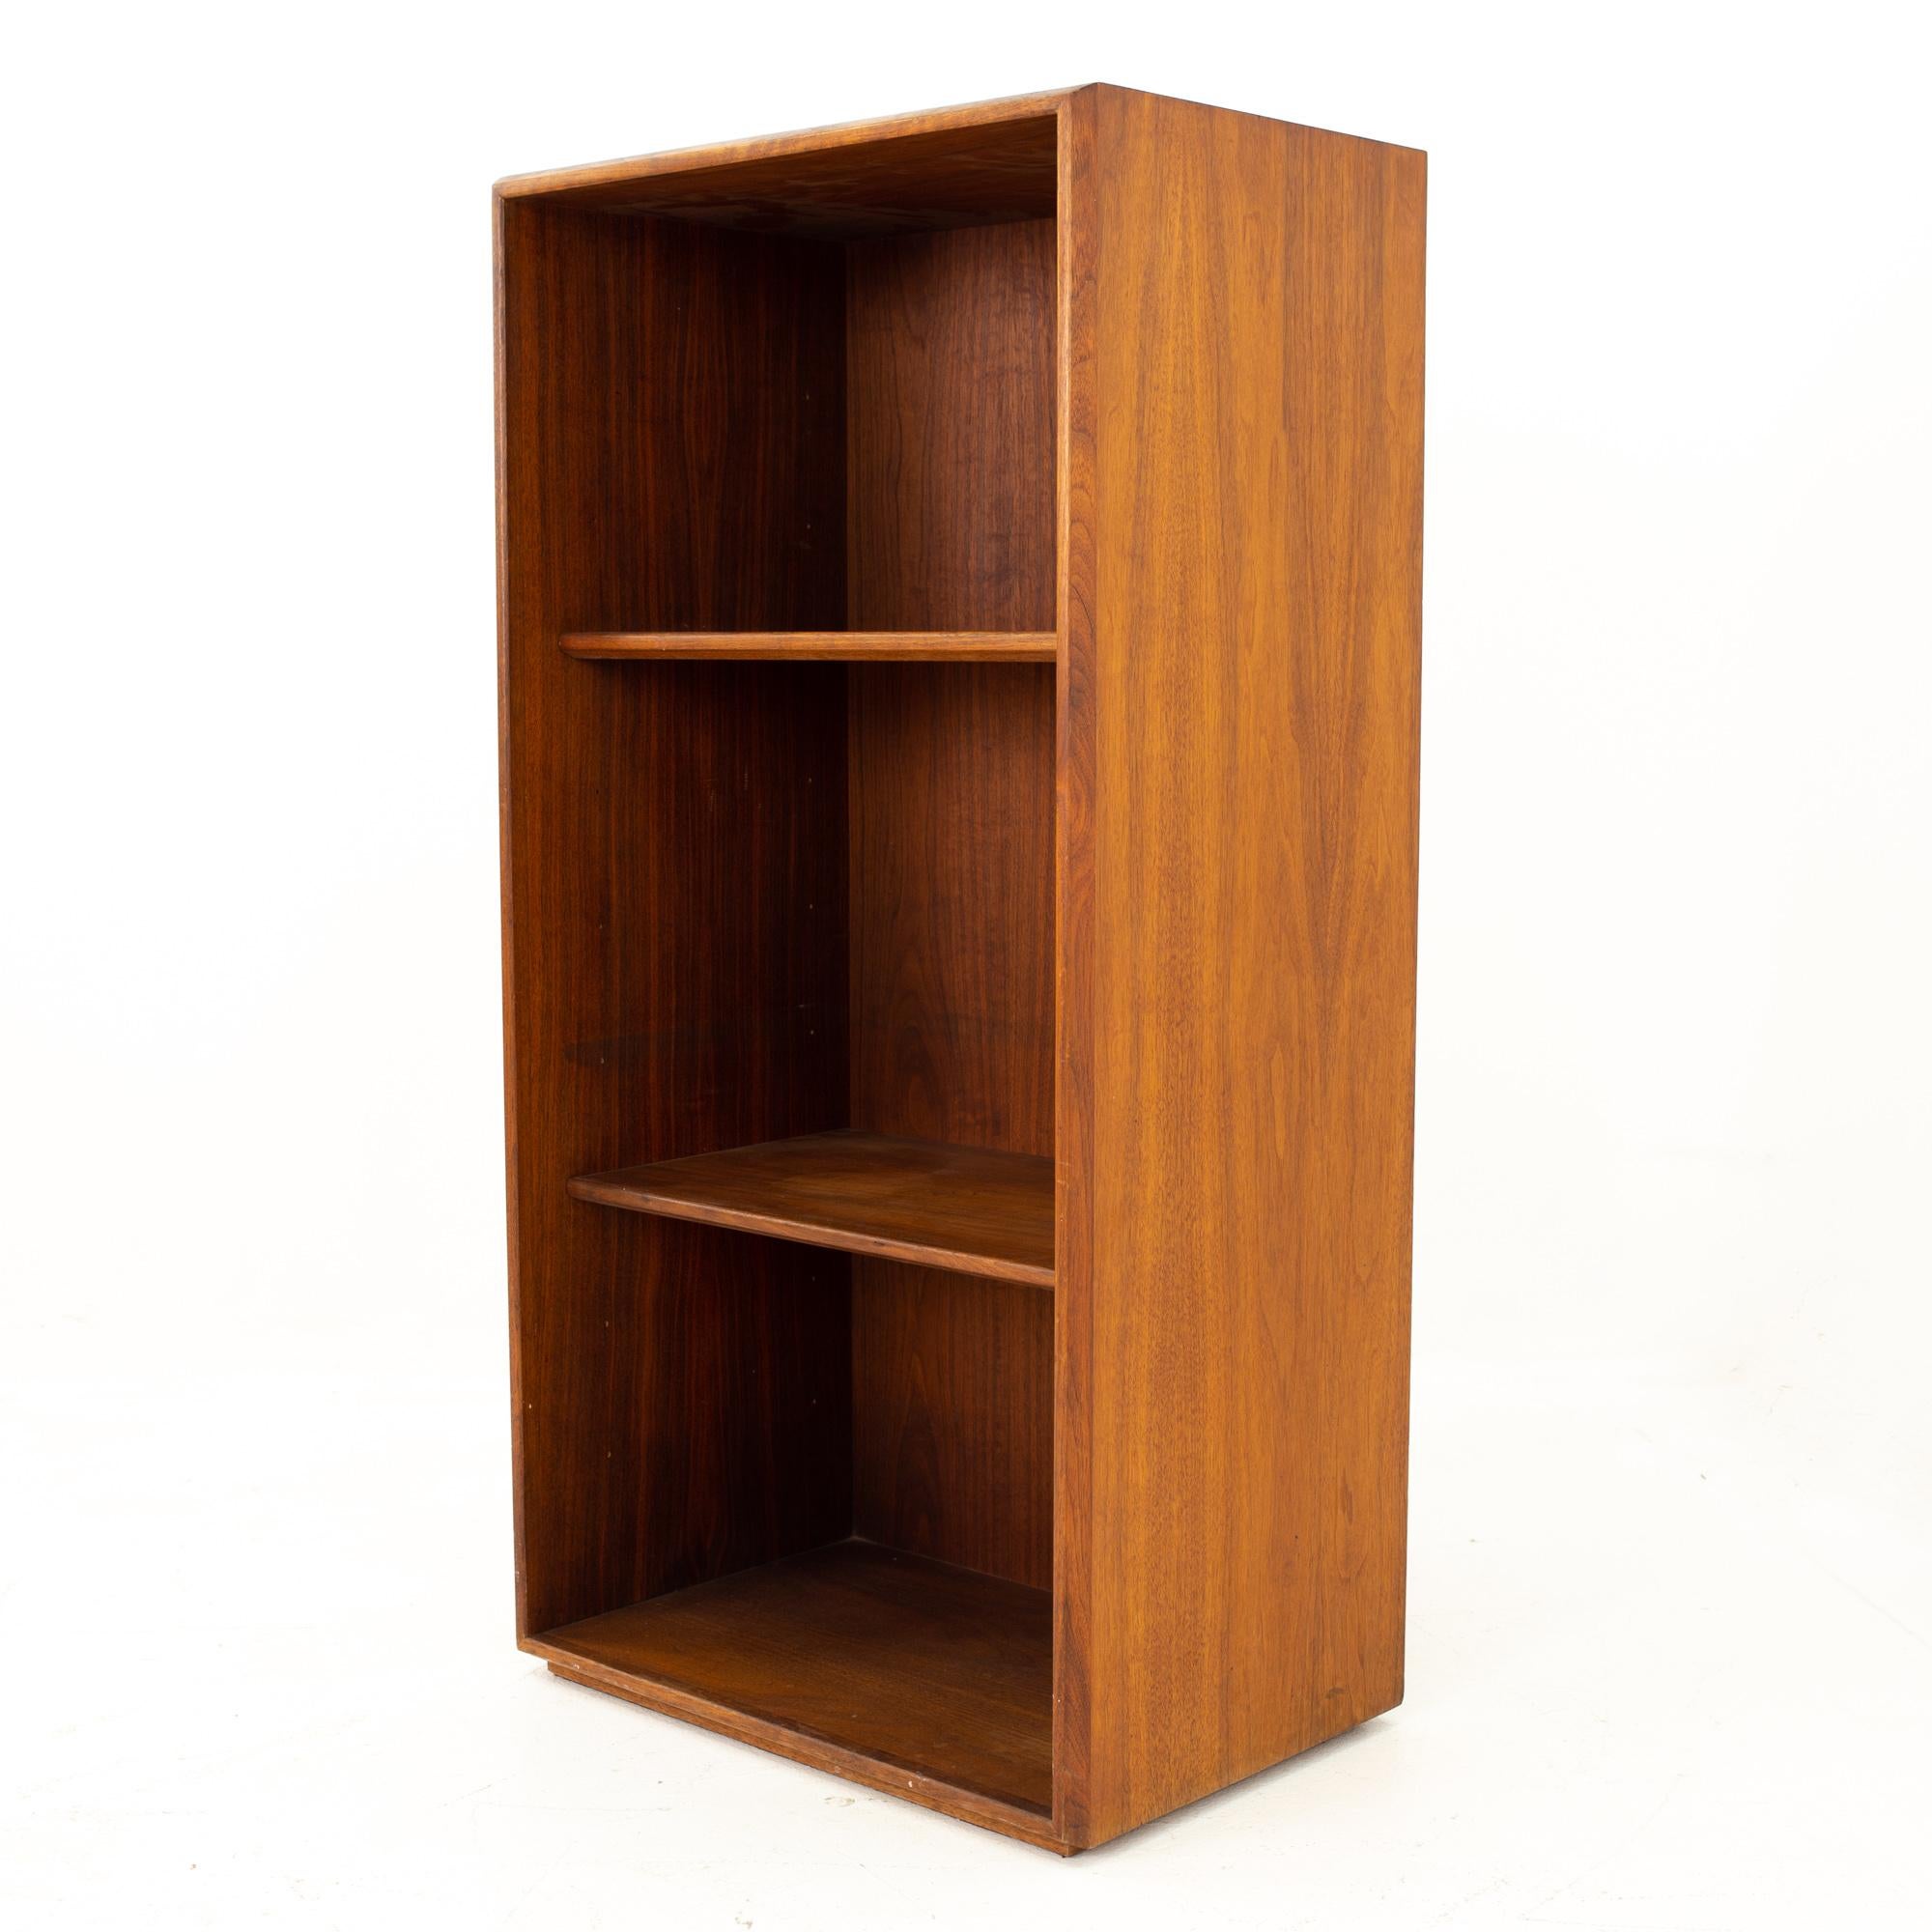 Jens Risom walnut bookcase shelving
Bookcase measures: 22.5 wide x 15 deep x 44 high

All pieces of furniture can be had in what we call restored vintage condition. That means the piece is restored upon purchase so it’s free of watermarks, chips